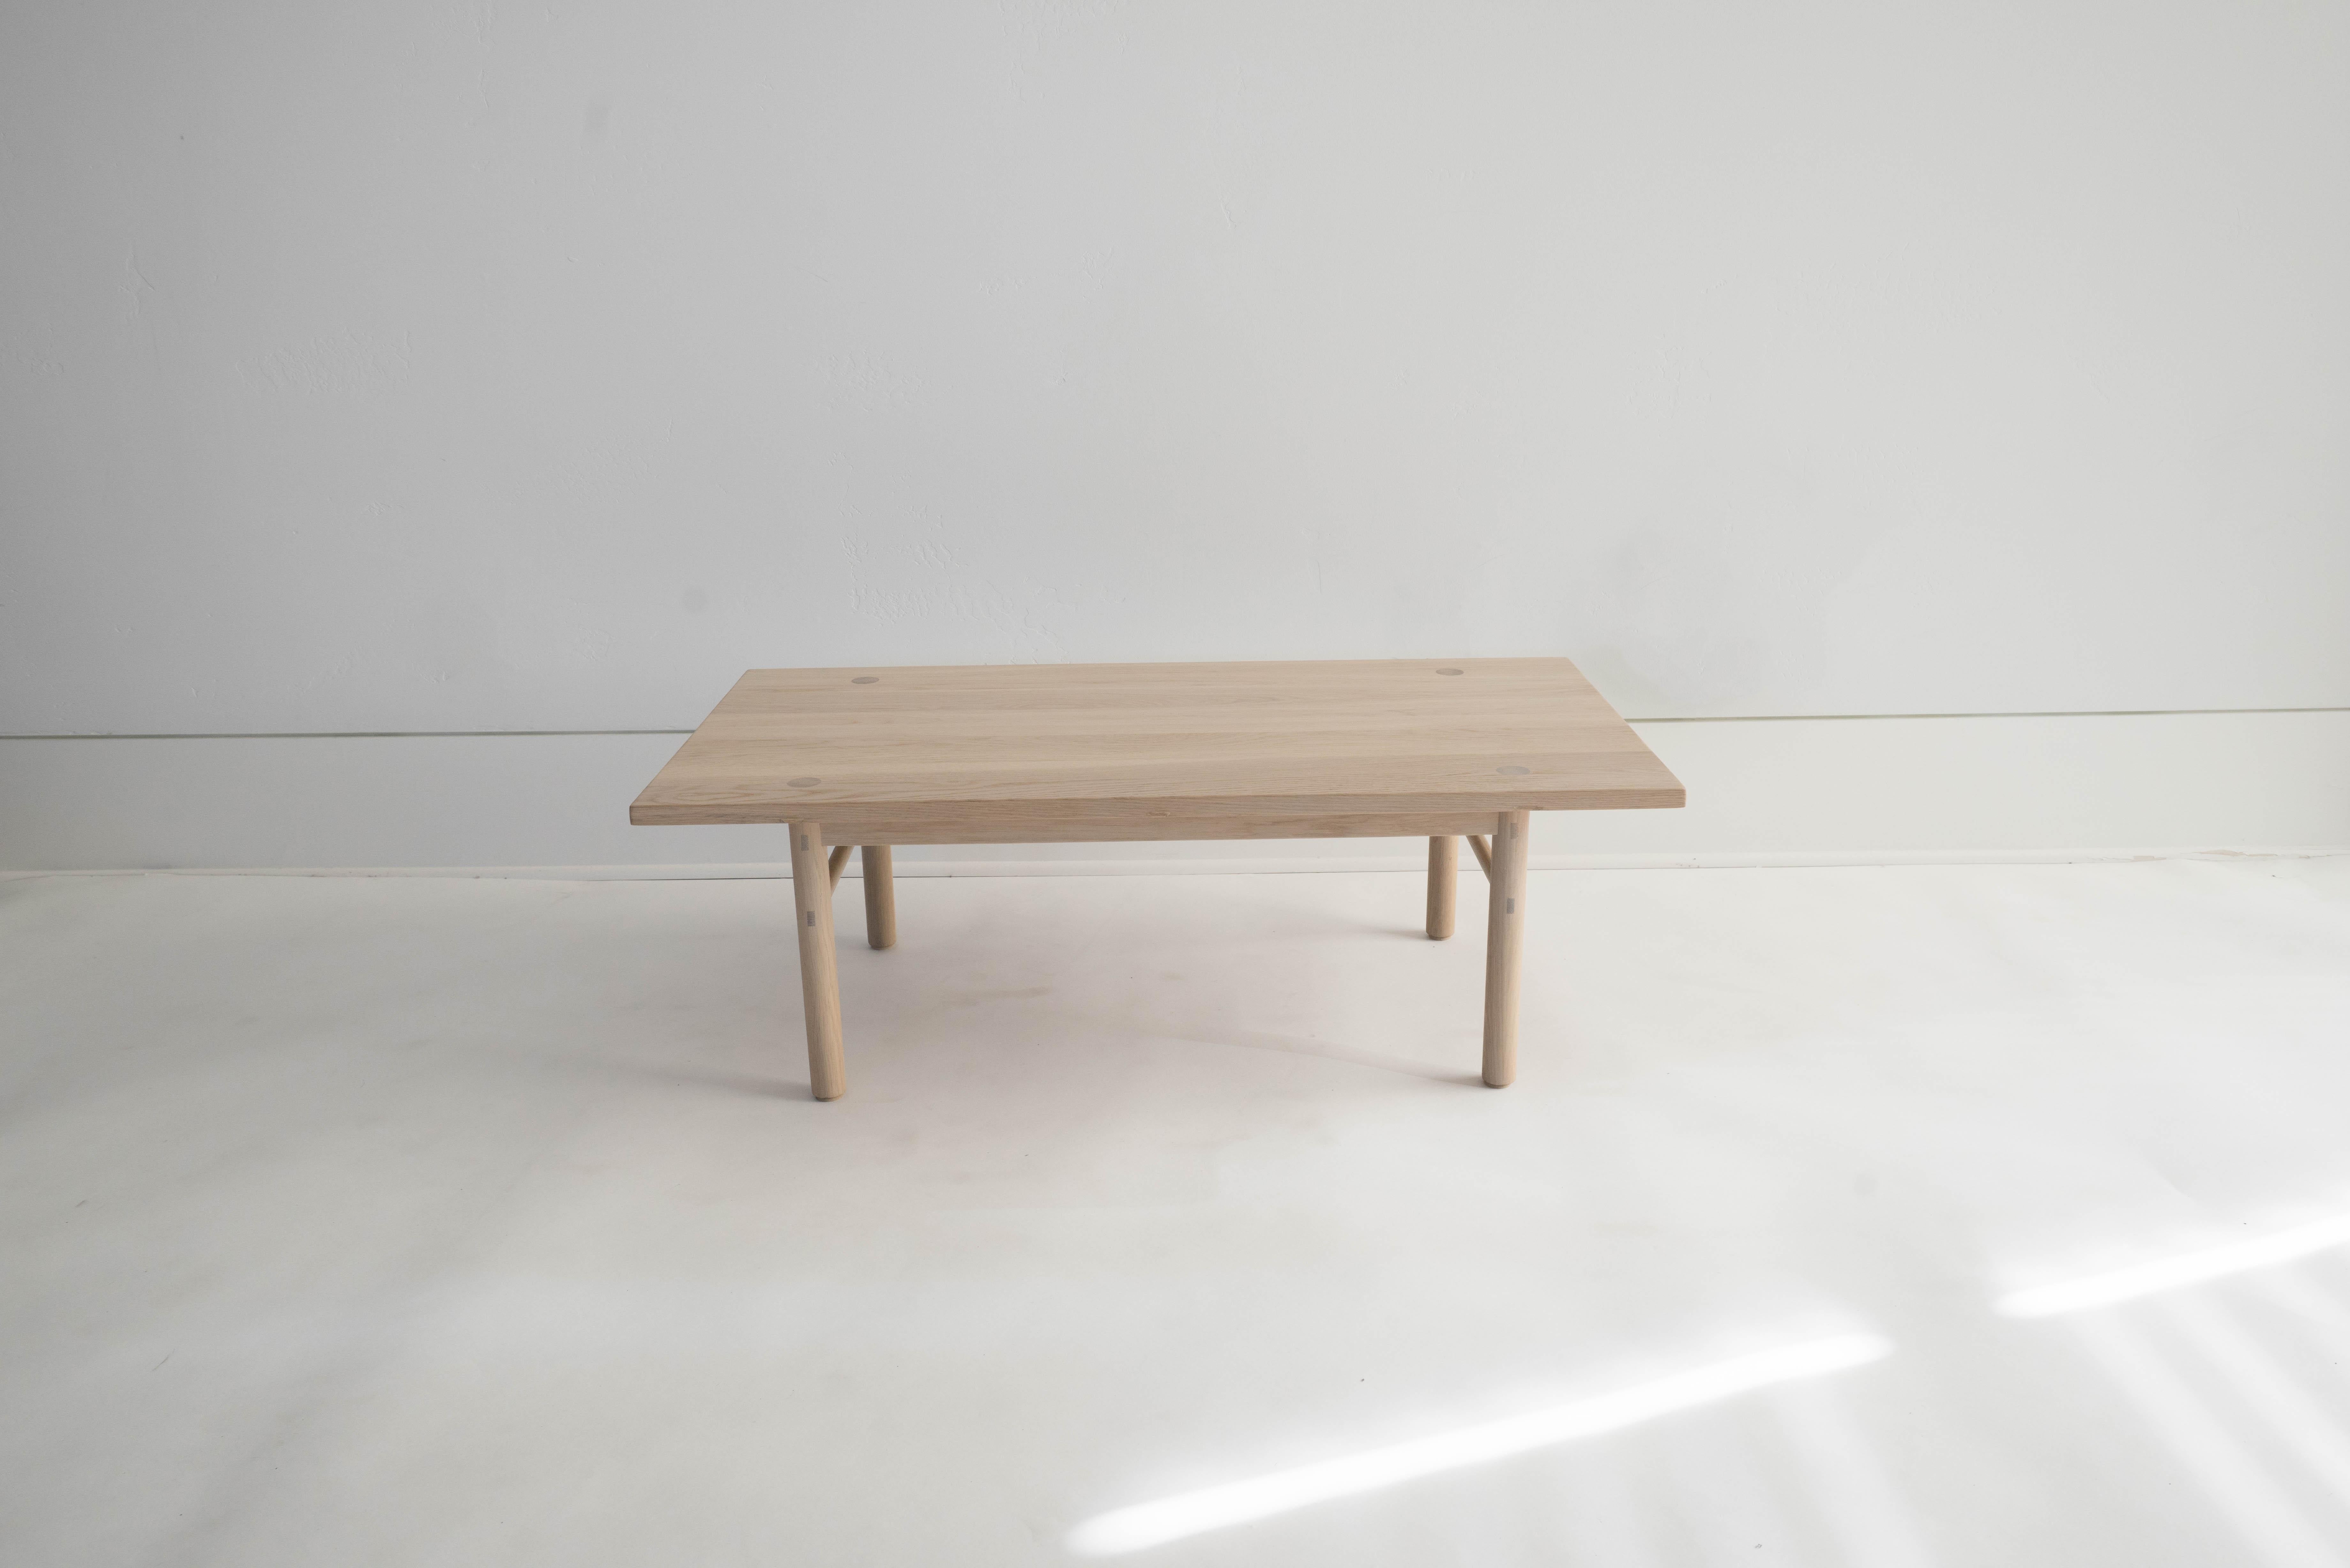 Sun at Six is a contemporary furniture design studio that works with traditional Chinese joinery masters to handcraft our pieces using traditional joinery. Our Classic coffee table simple, versatile and functional. Tenna oil is hand rubbed.

Exposed